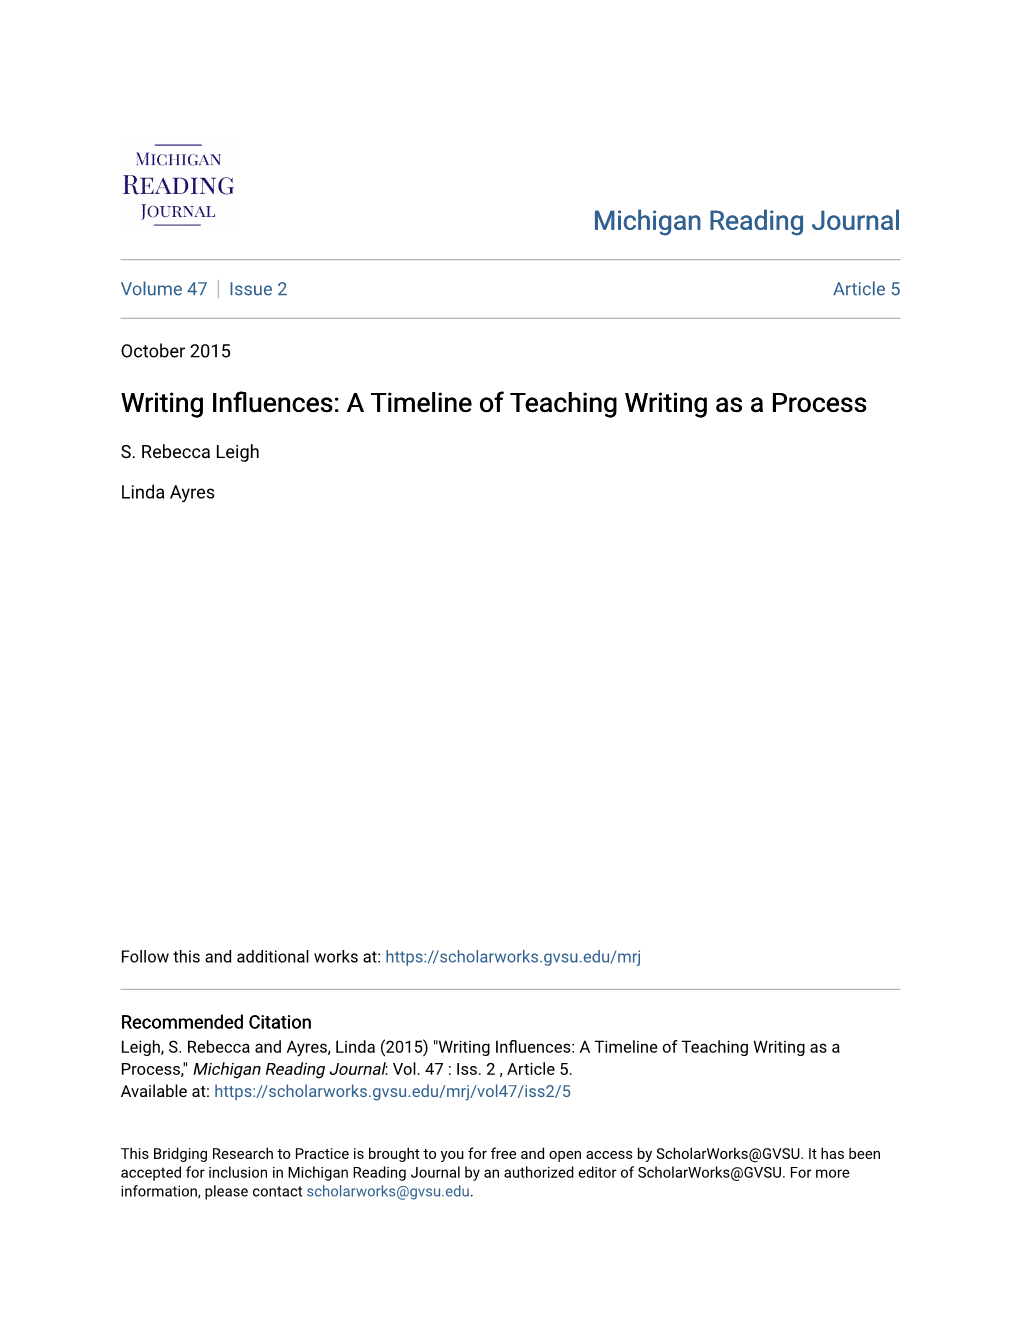 A Timeline of Teaching Writing As a Process by S